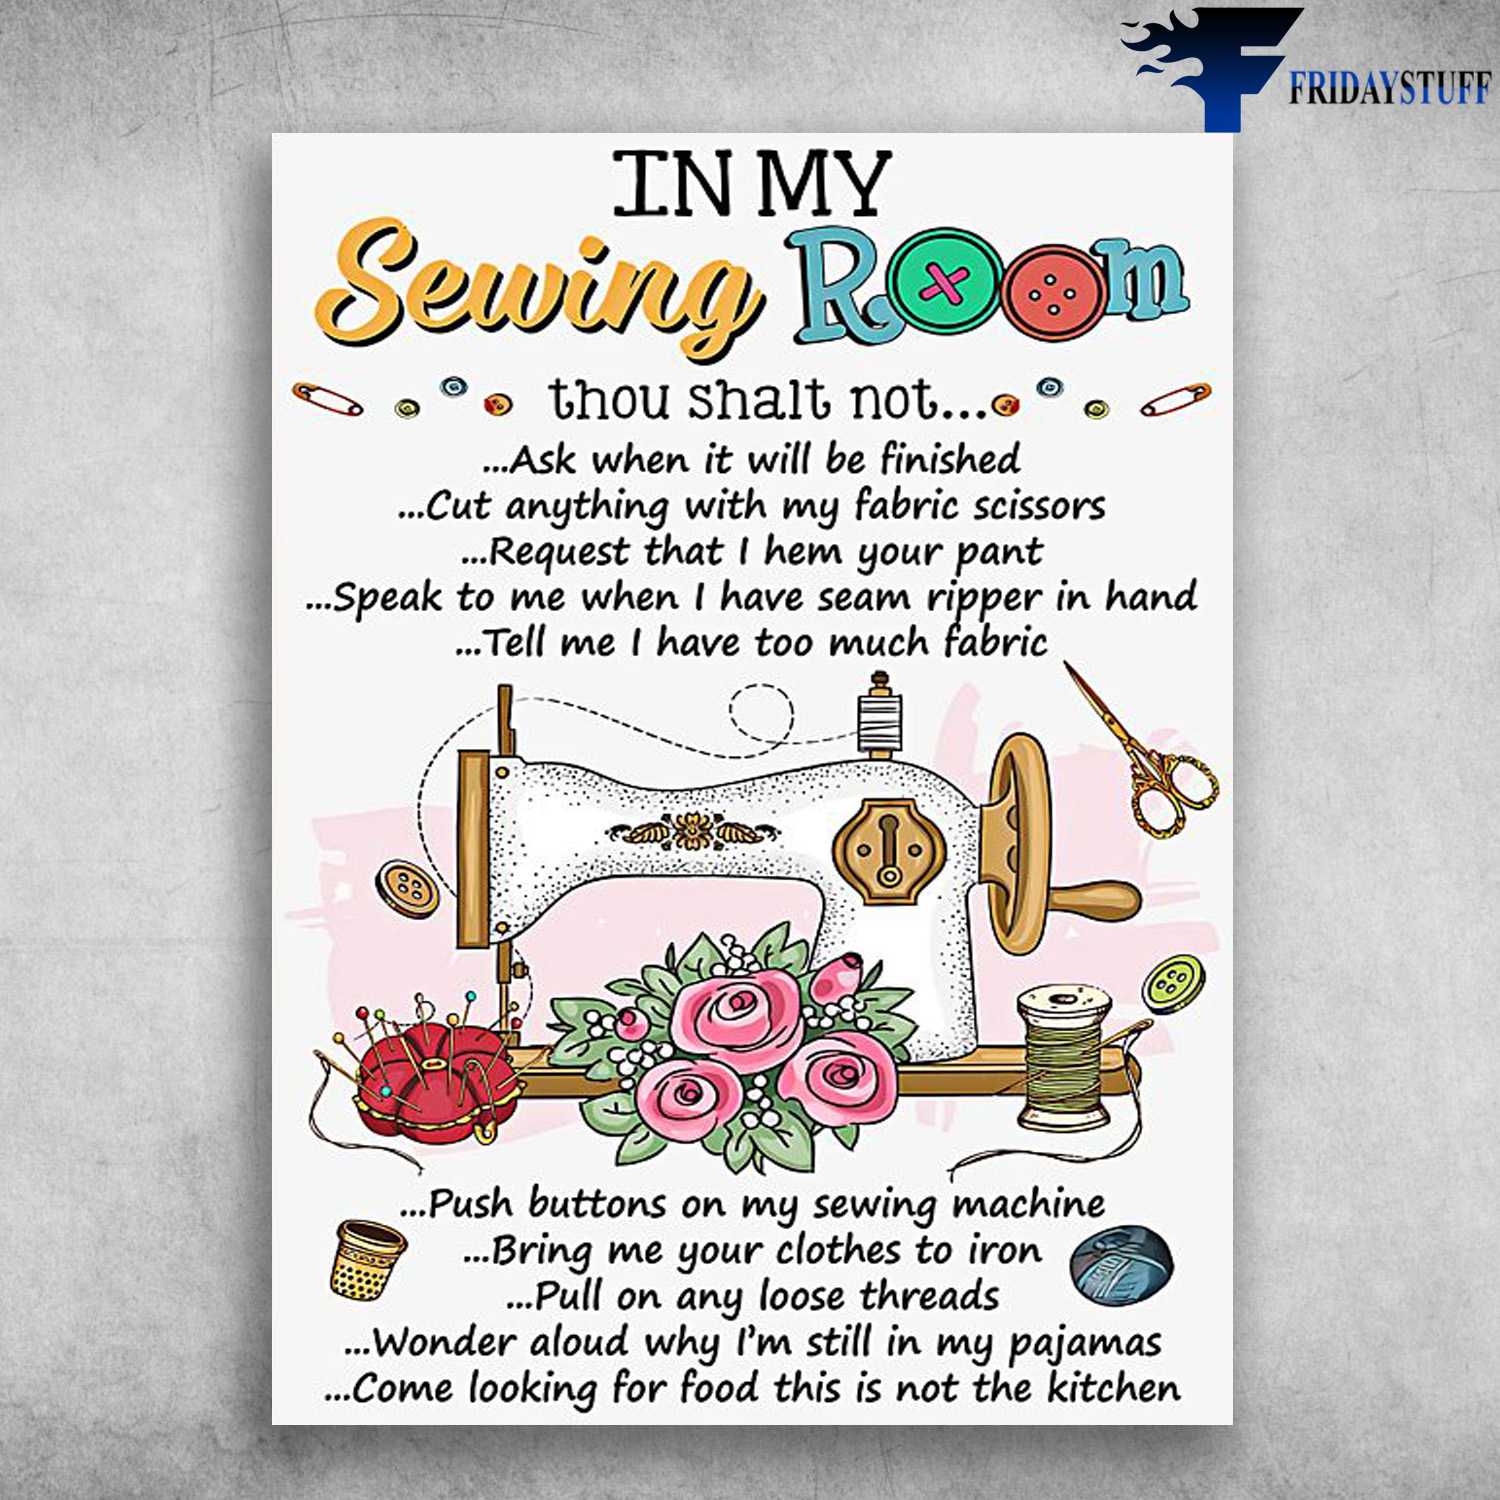 Sewing Room, Sewing Poster - In My Sewing Room, Thou Shalt Not, Ask When It Will Be Finished, Cut Anything With My Fanric Scissors, Request That I Hem Your Pant